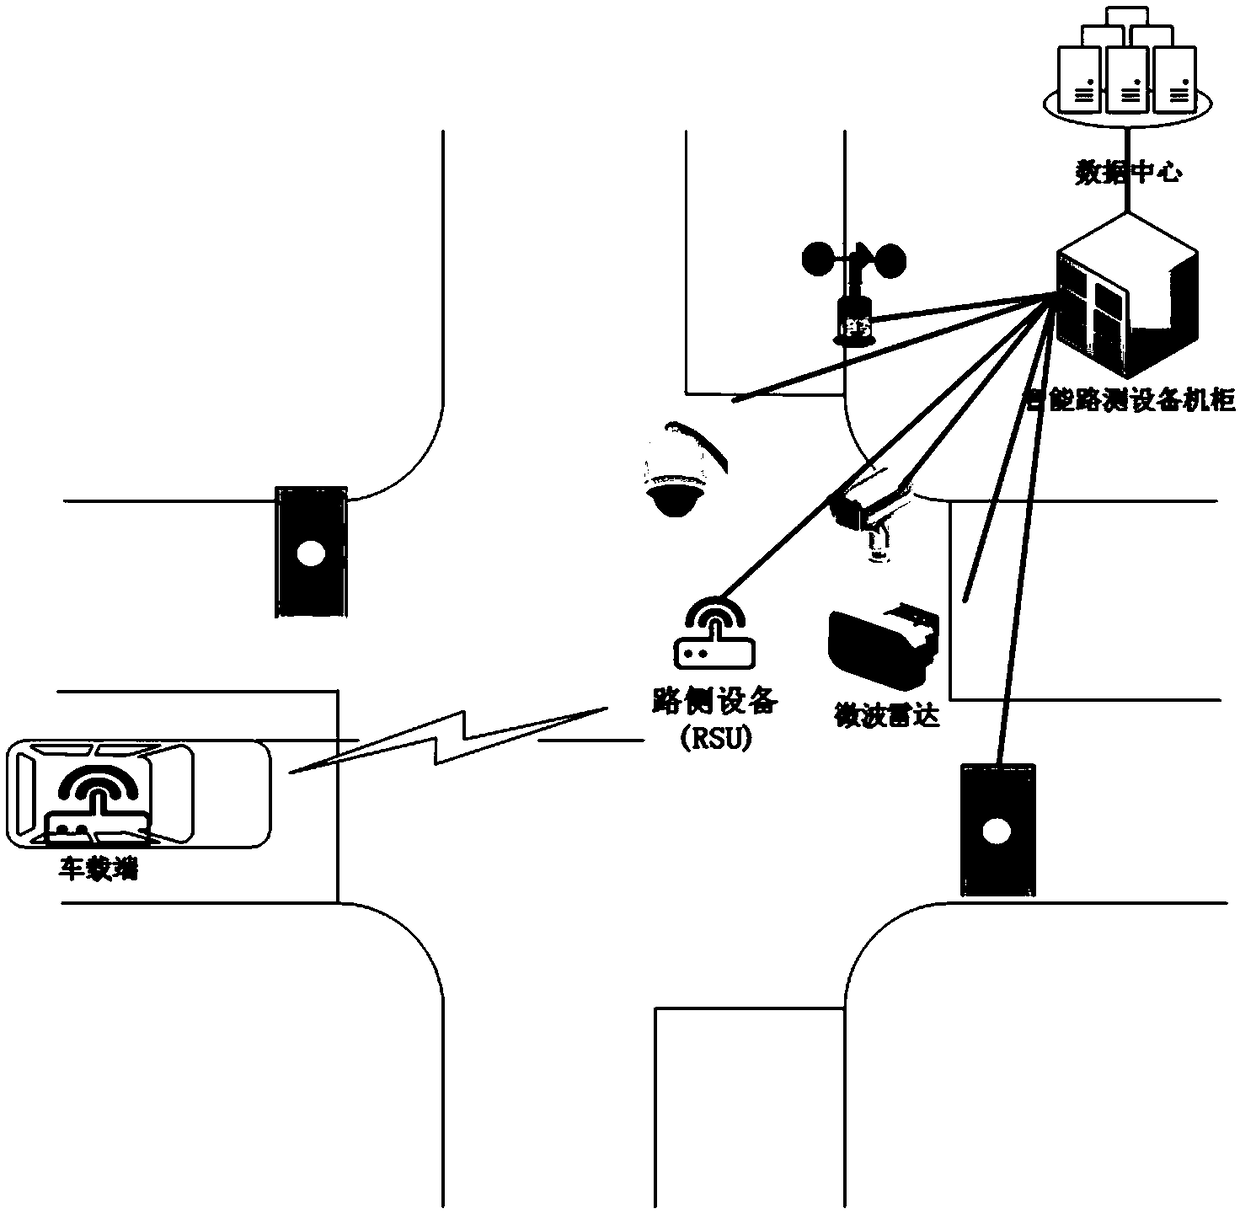 Integrated intelligent roadside system for multi-information collection and release